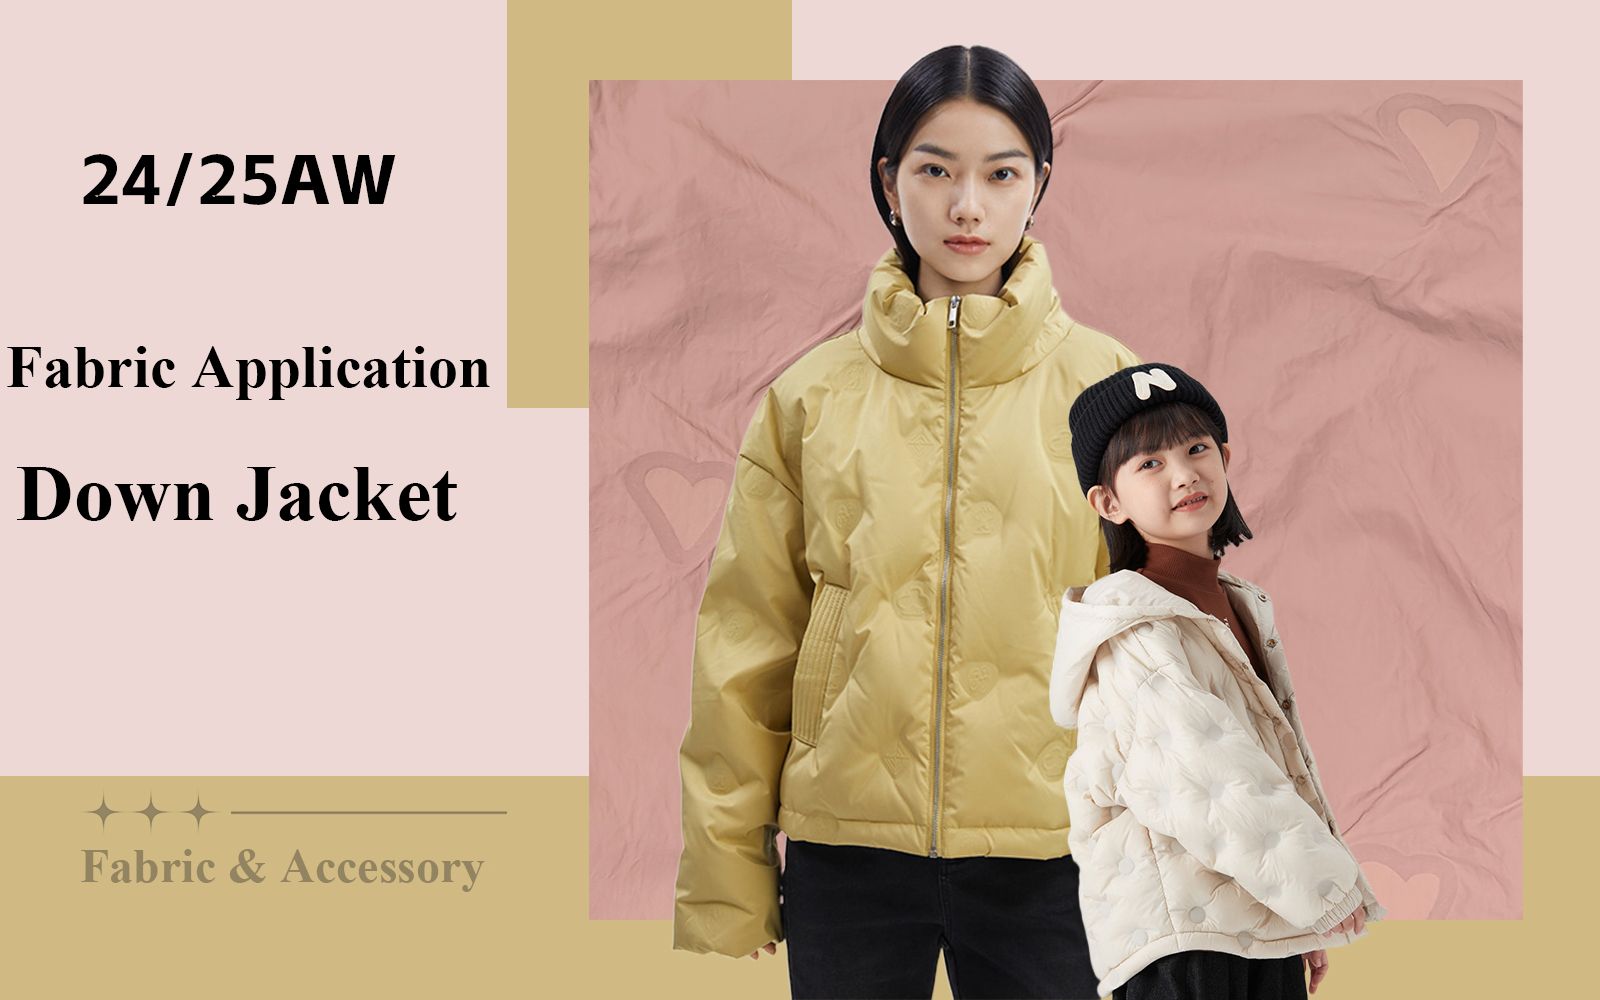 Advanced Craft -- The Fabric Trend for Women's & Girls' Down Jacket